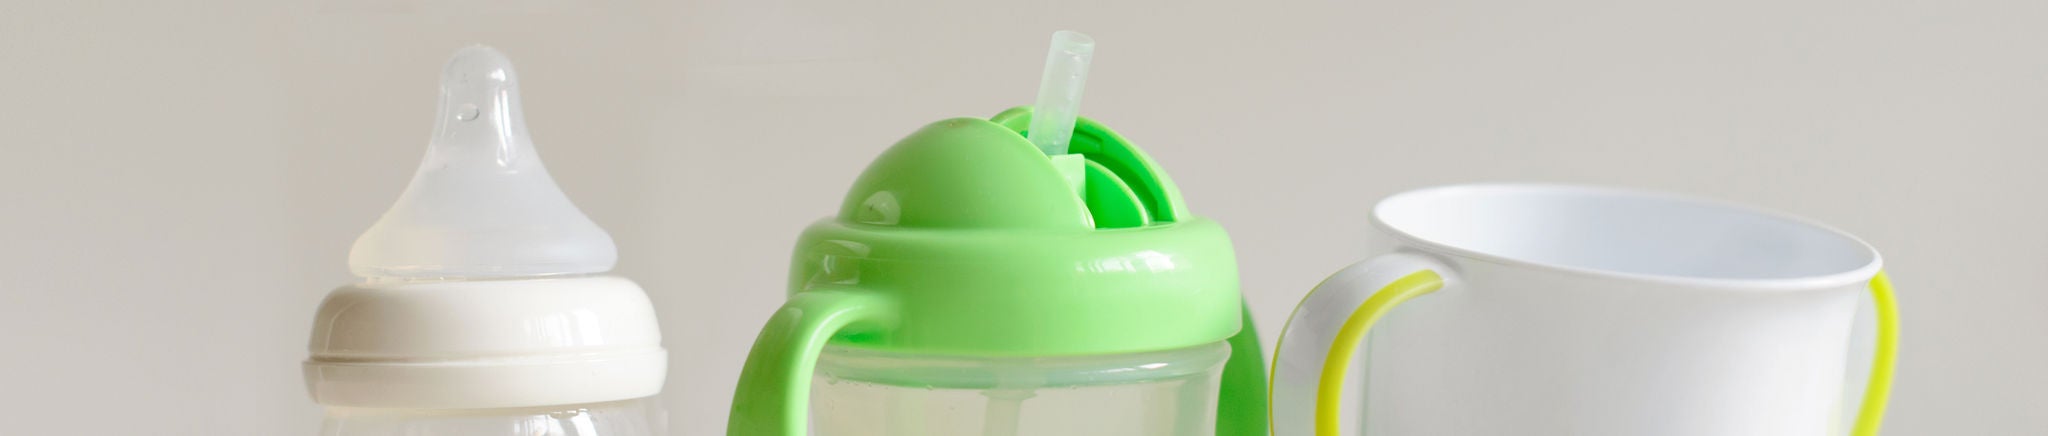 From left to right: a baby bottle, sippy cup and toddler cup.